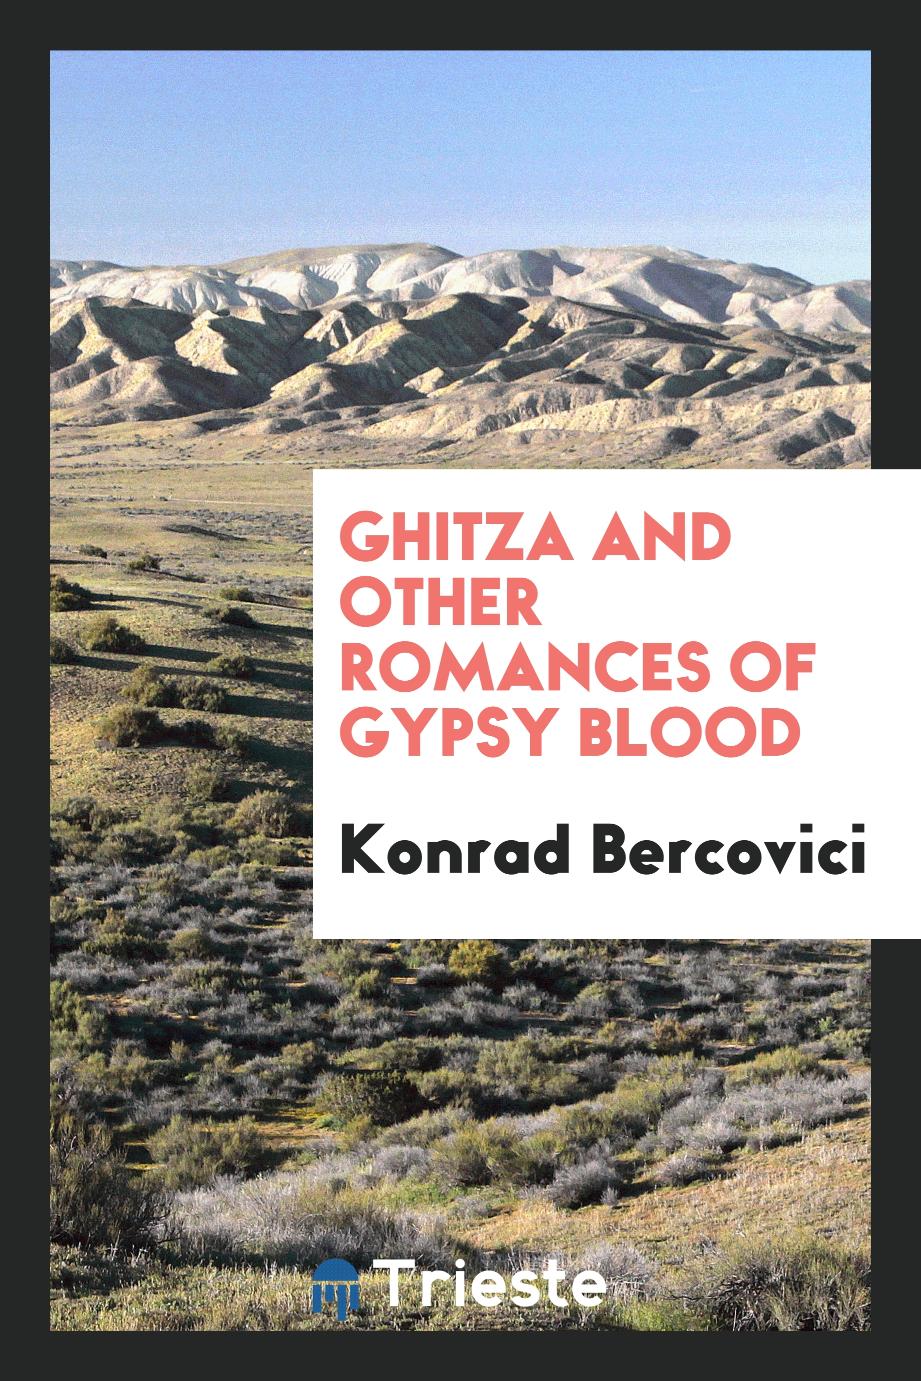 Ghitza and other romances of gypsy blood